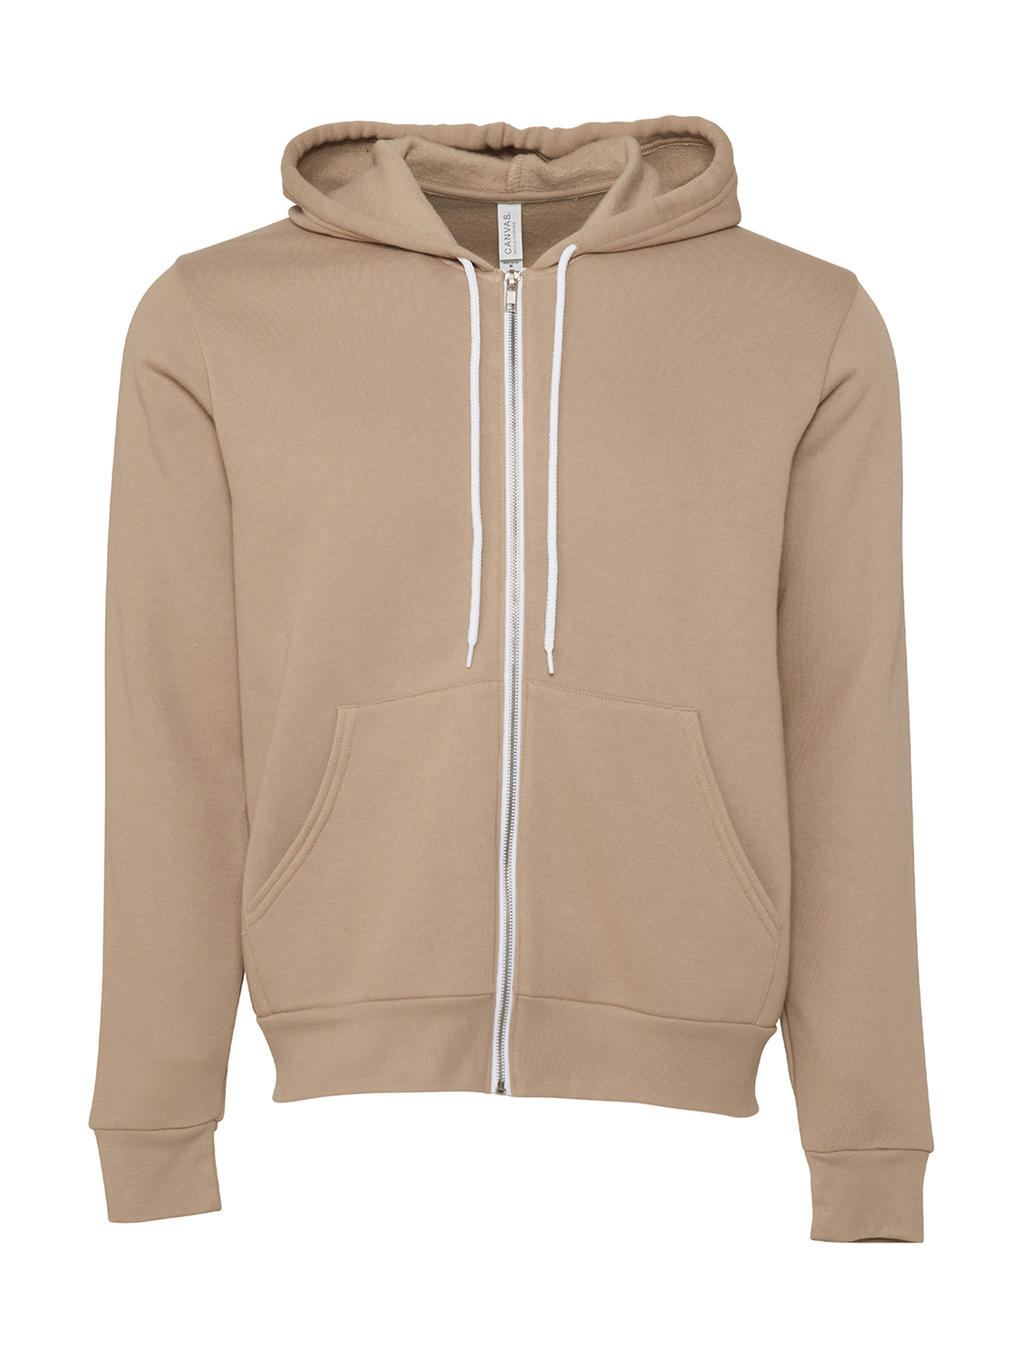  Unisex Poly-Cotton Full Zip Hoodie in Farbe Tan